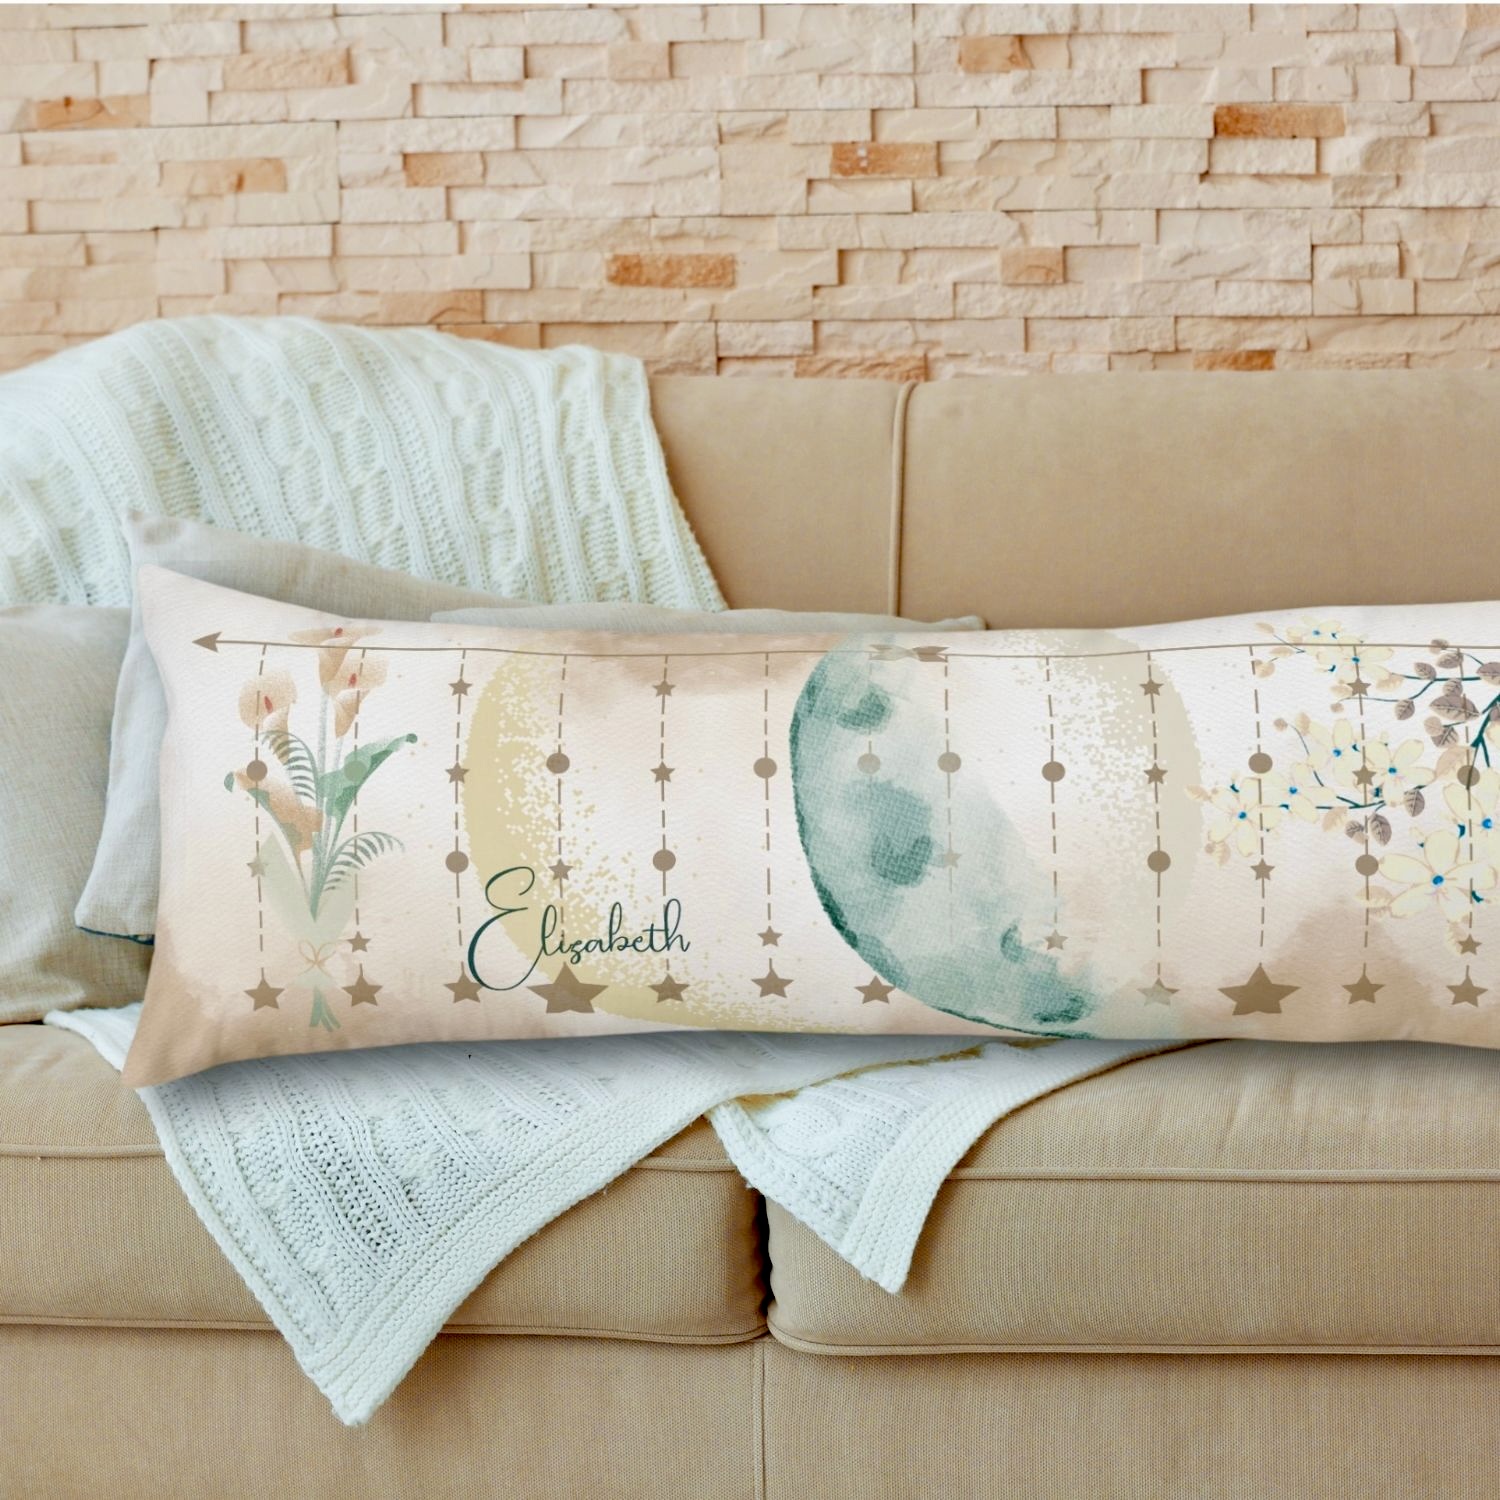 Experience ultimate comfort with our Boho Earthy Flowers Body Pillow. Embrace tranquility and relaxation with its serene floral designs, promising nights of restful sleep and rejuvenation.